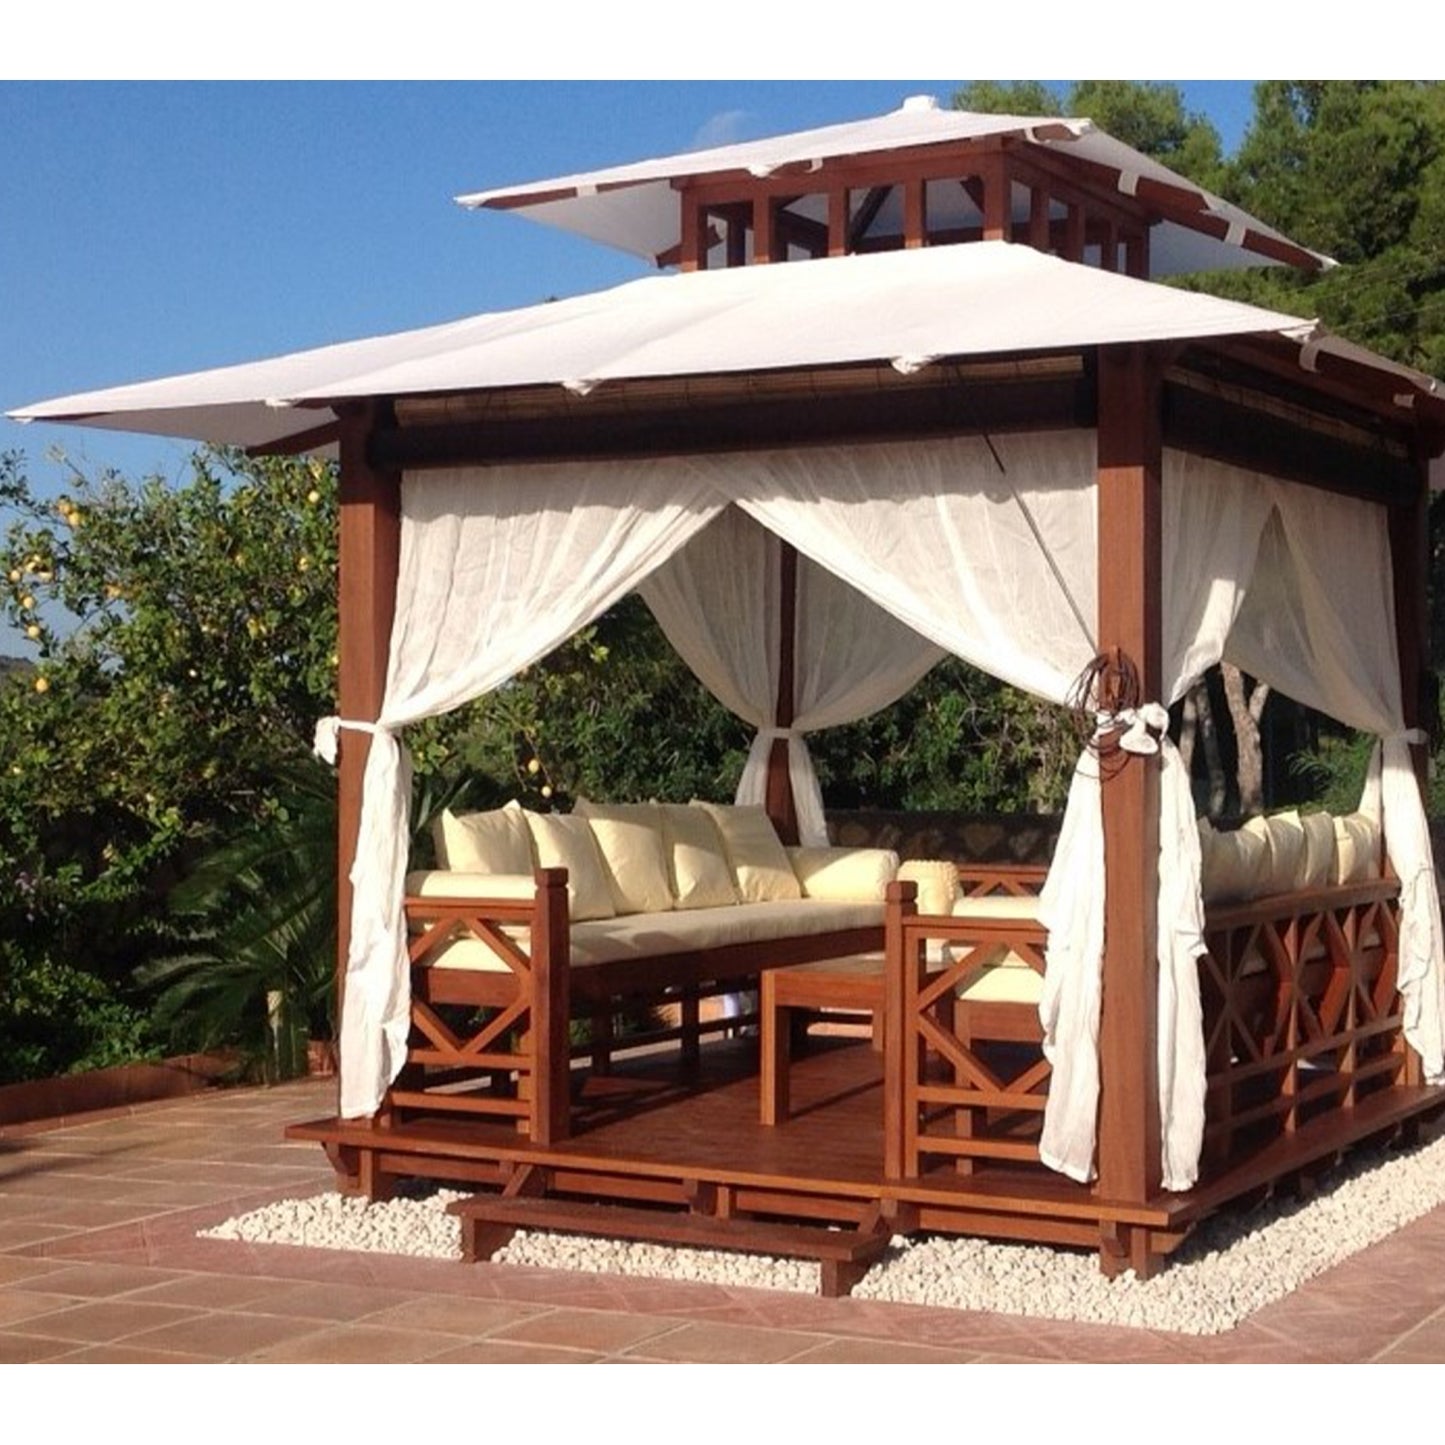 Exaco | 10x10 Ft Exquisite Handcrafted Solid Wood Gazebo With Canopy, Coffee Table and Benches From Bali Indonesia